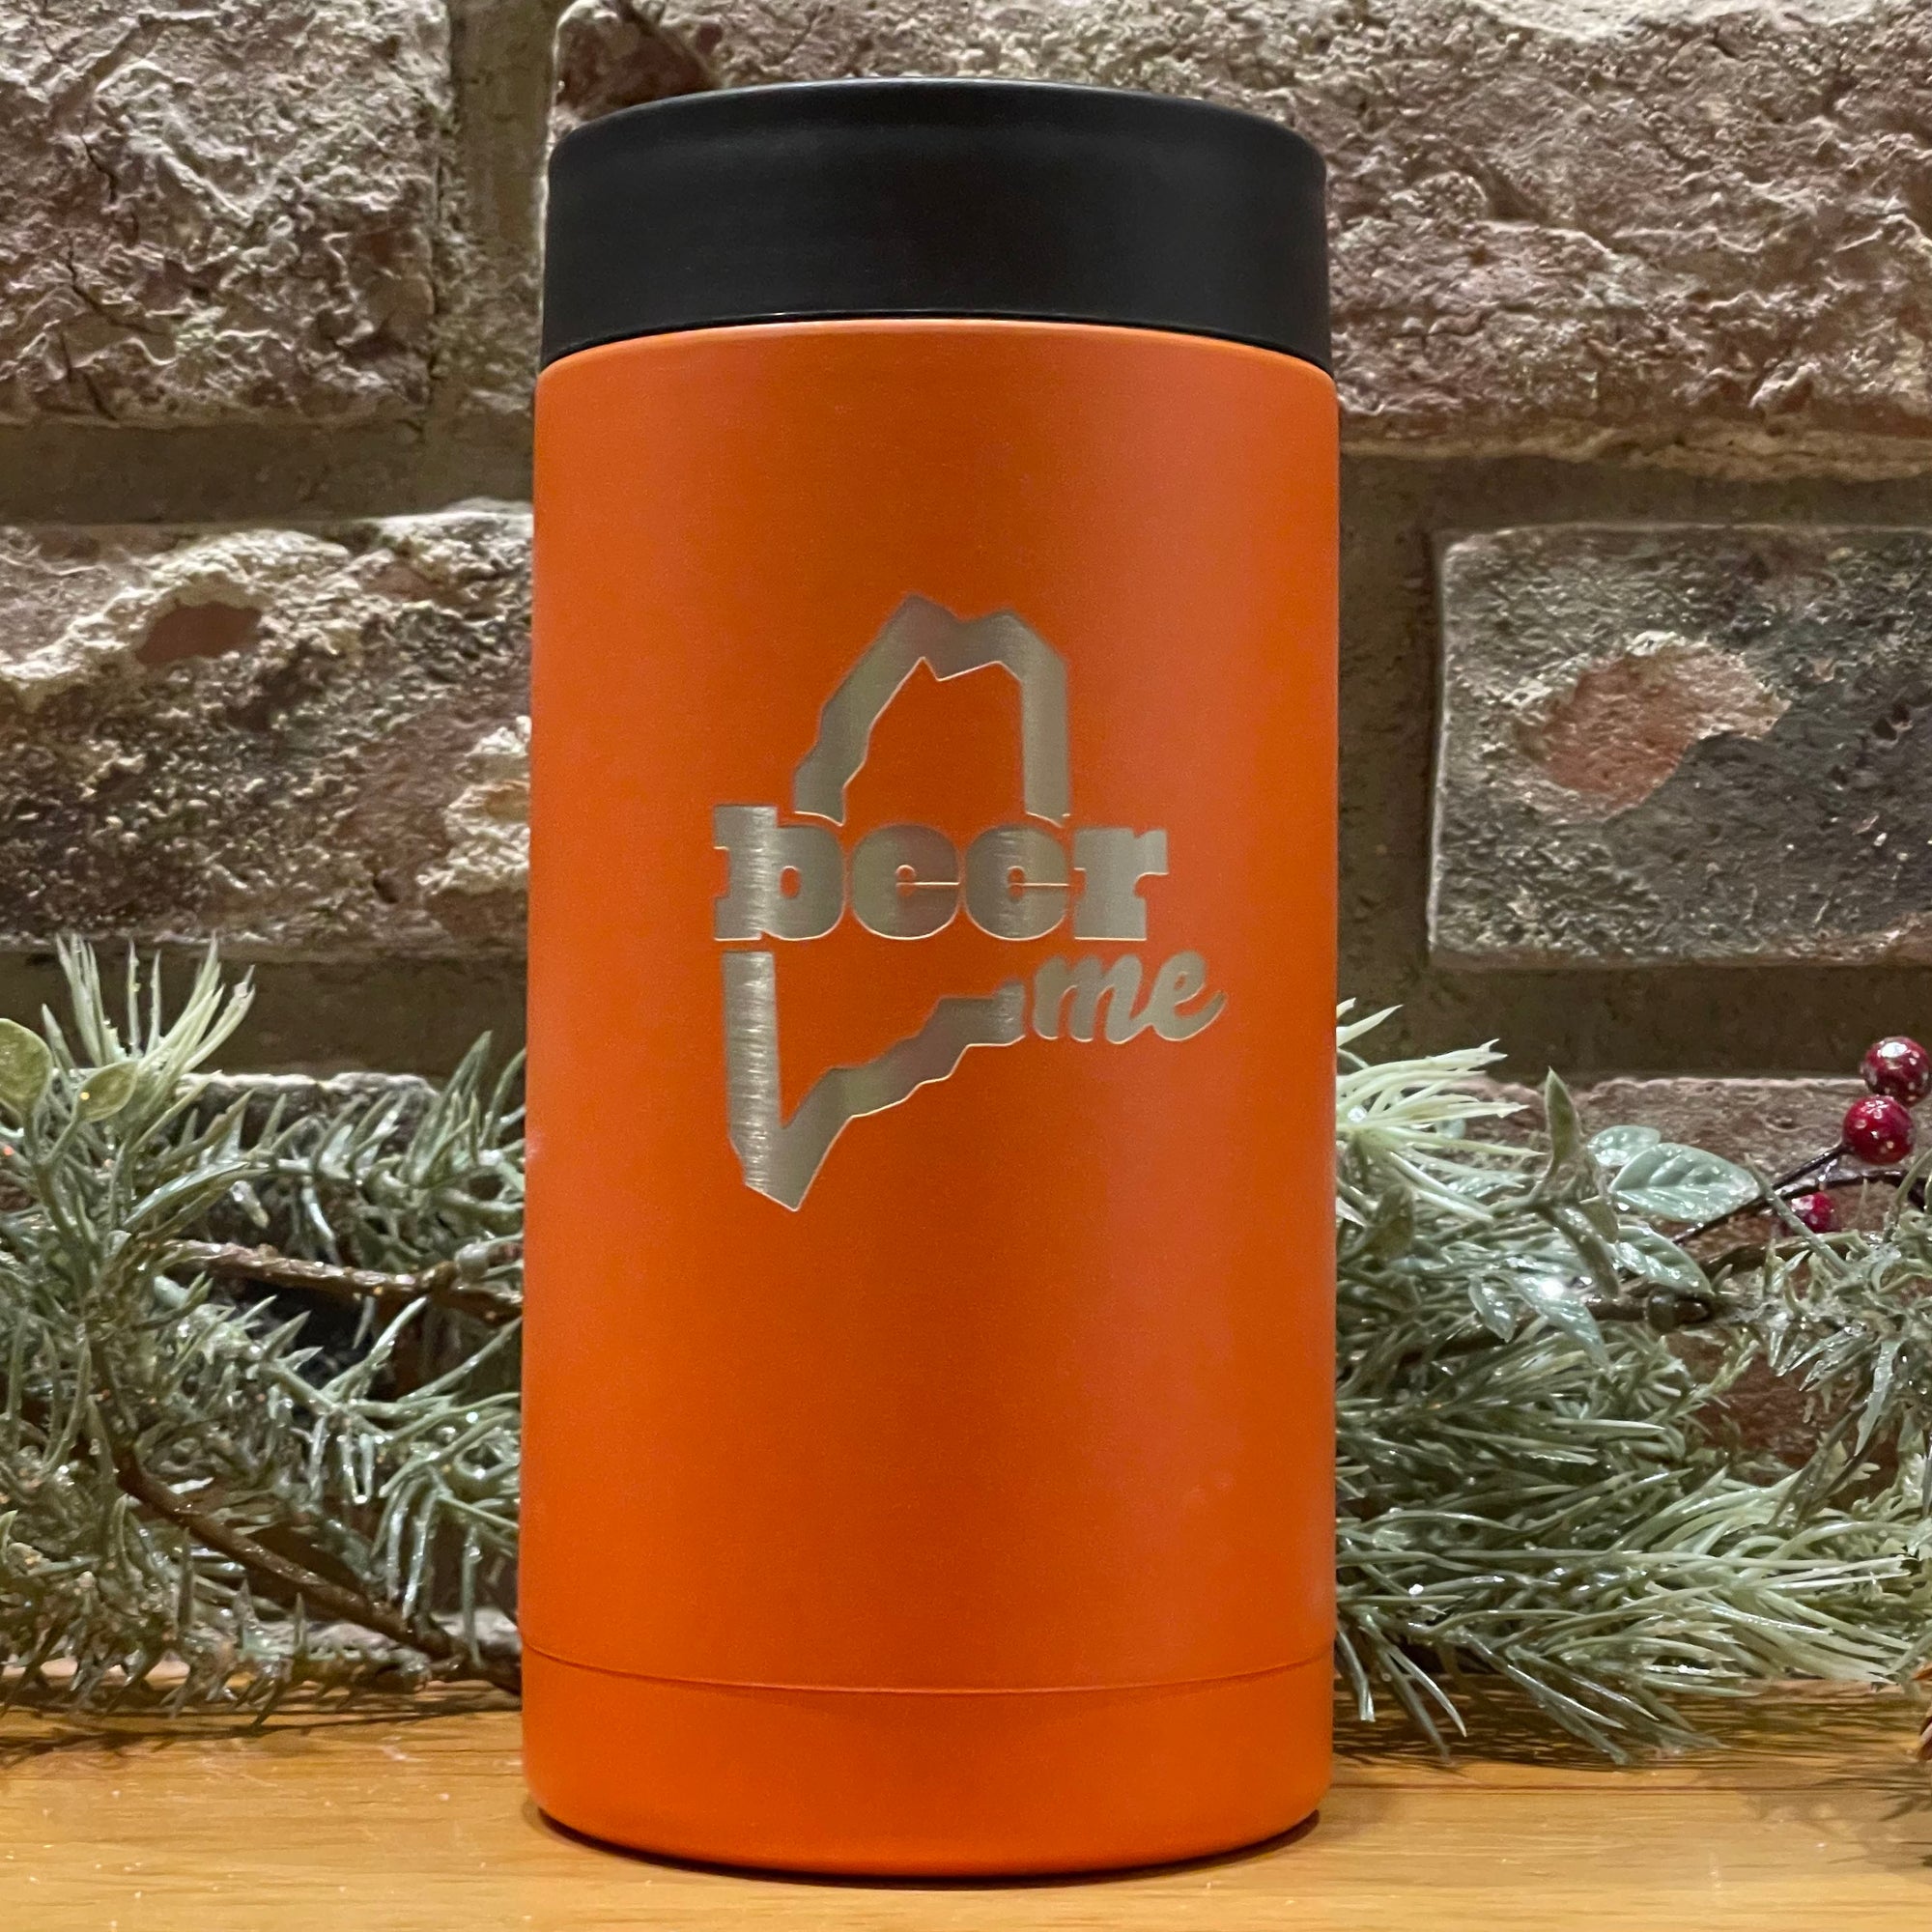 BeerME 16 oz Insulated Can Cooler